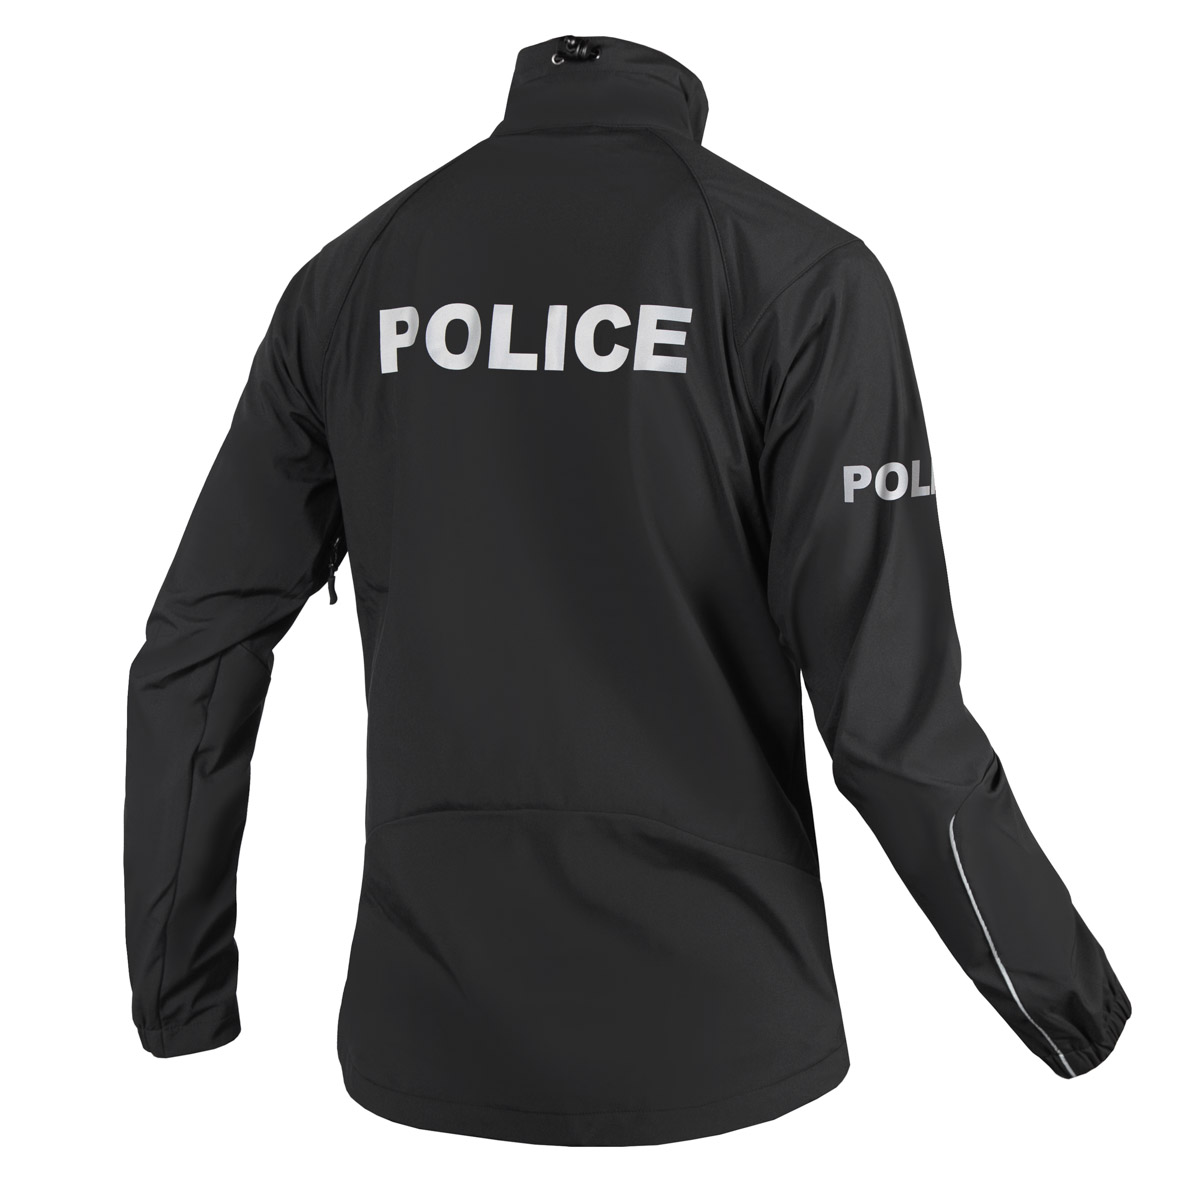 【88%OFF!】 UK Police Soft Shell Jacket ダ－クネイビー kids-nurie.com